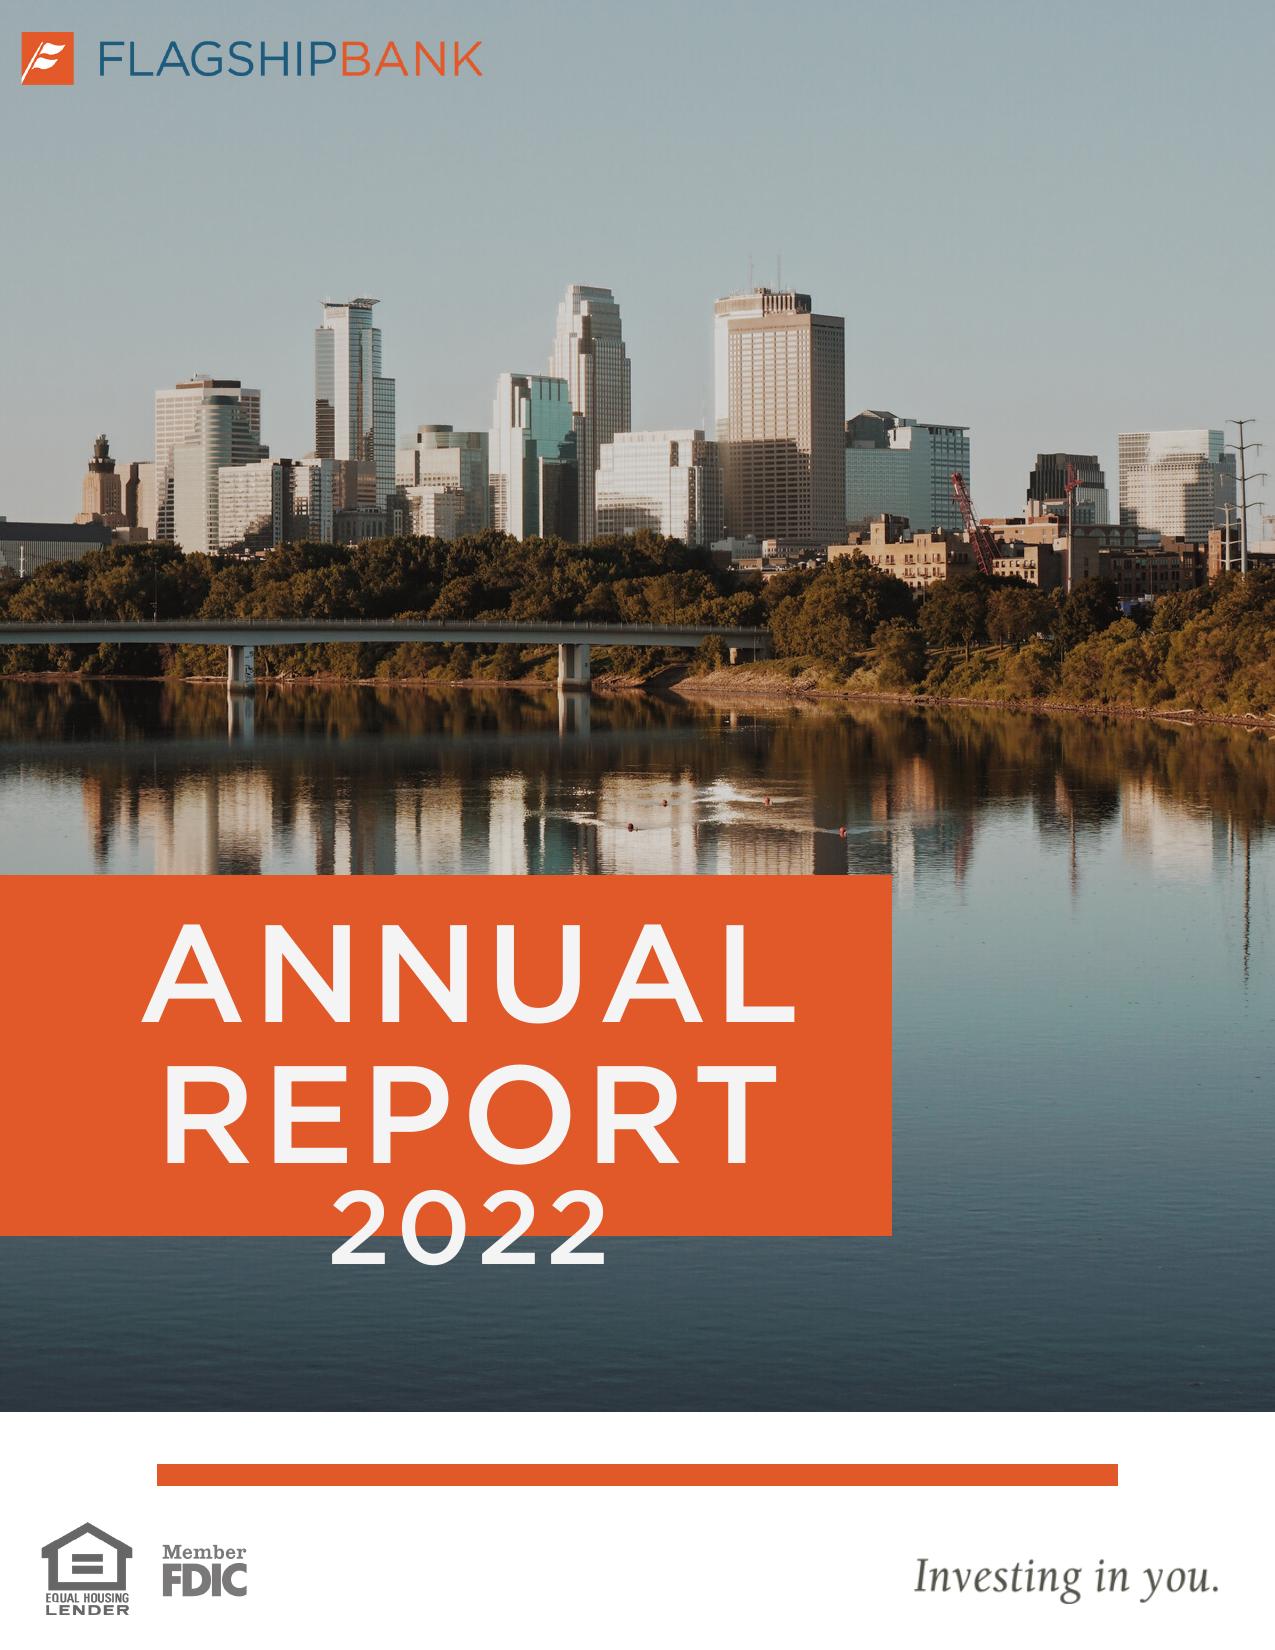 FLAGSHIPBANKS 2022 Annual Report